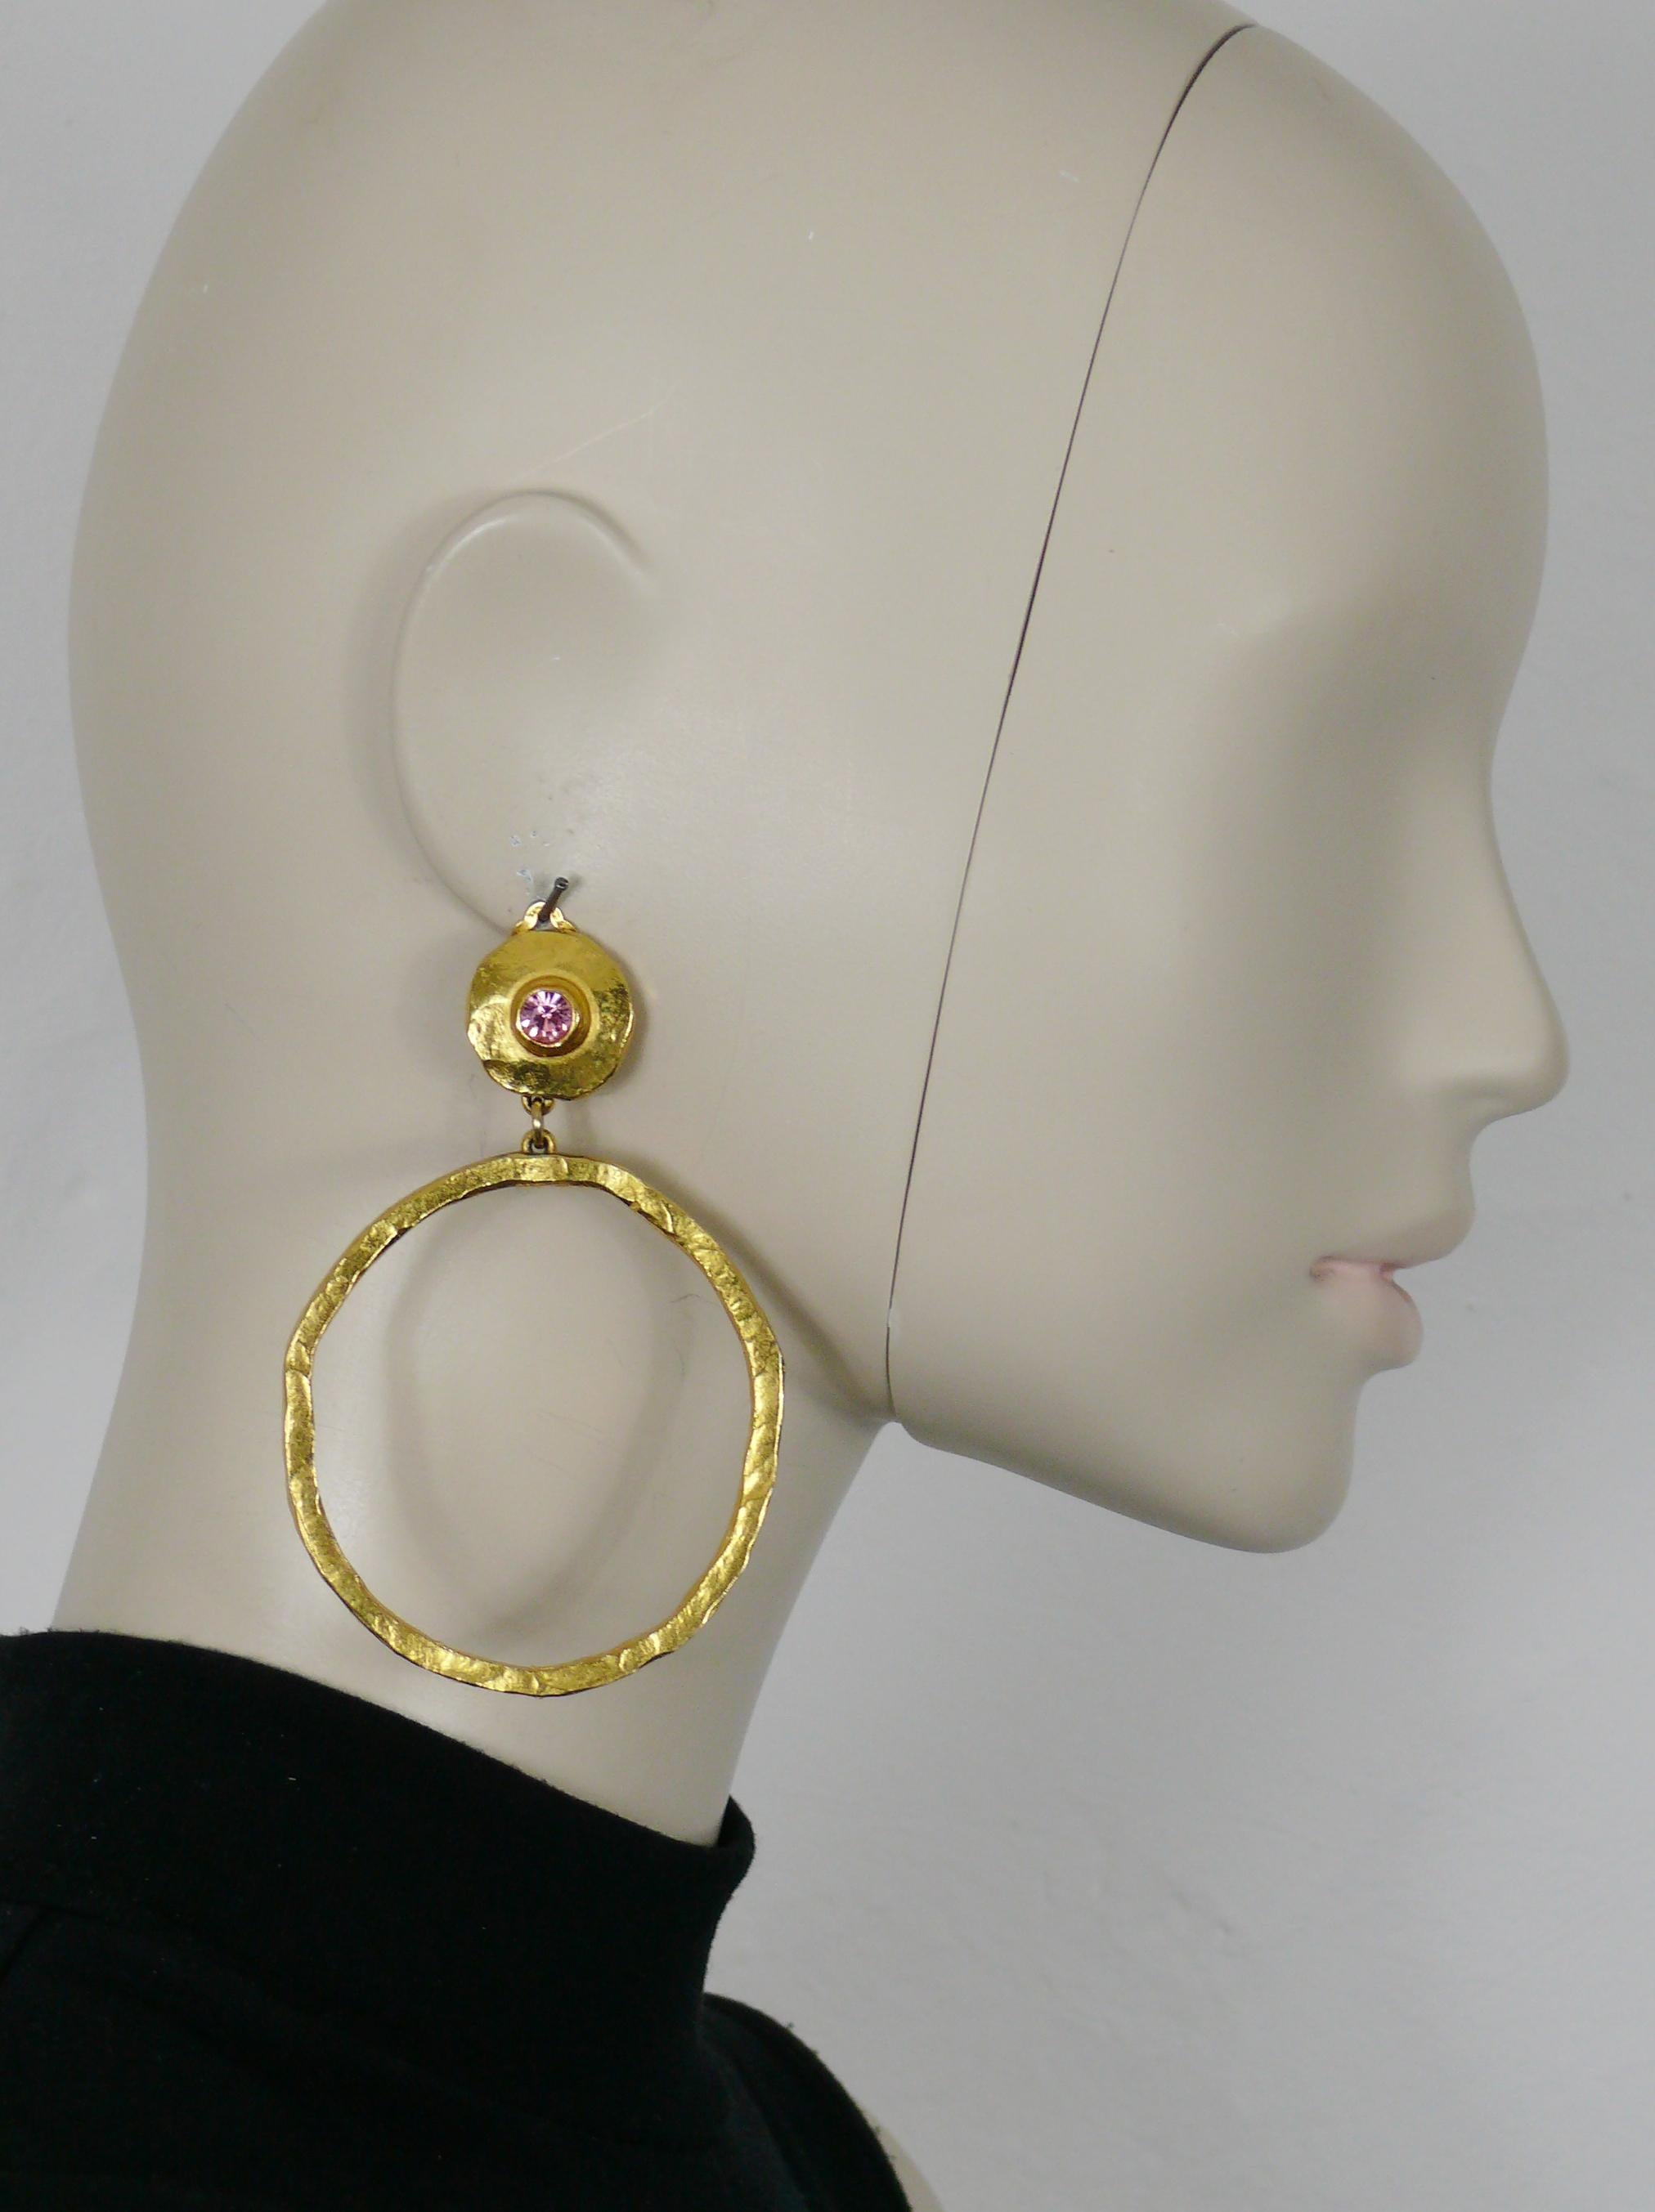 EDOUARD RAMBAUD vintage gold tone oversized hoop earrings (clip-on) embellished with pink crystal.

Embossed EDOUARD RAMBAUD Paris.

Indicative measurements : length approx. 9 cm (3.54 inches) / max. width approx. 6.1 cm (2.40 inches).

JEWELRY